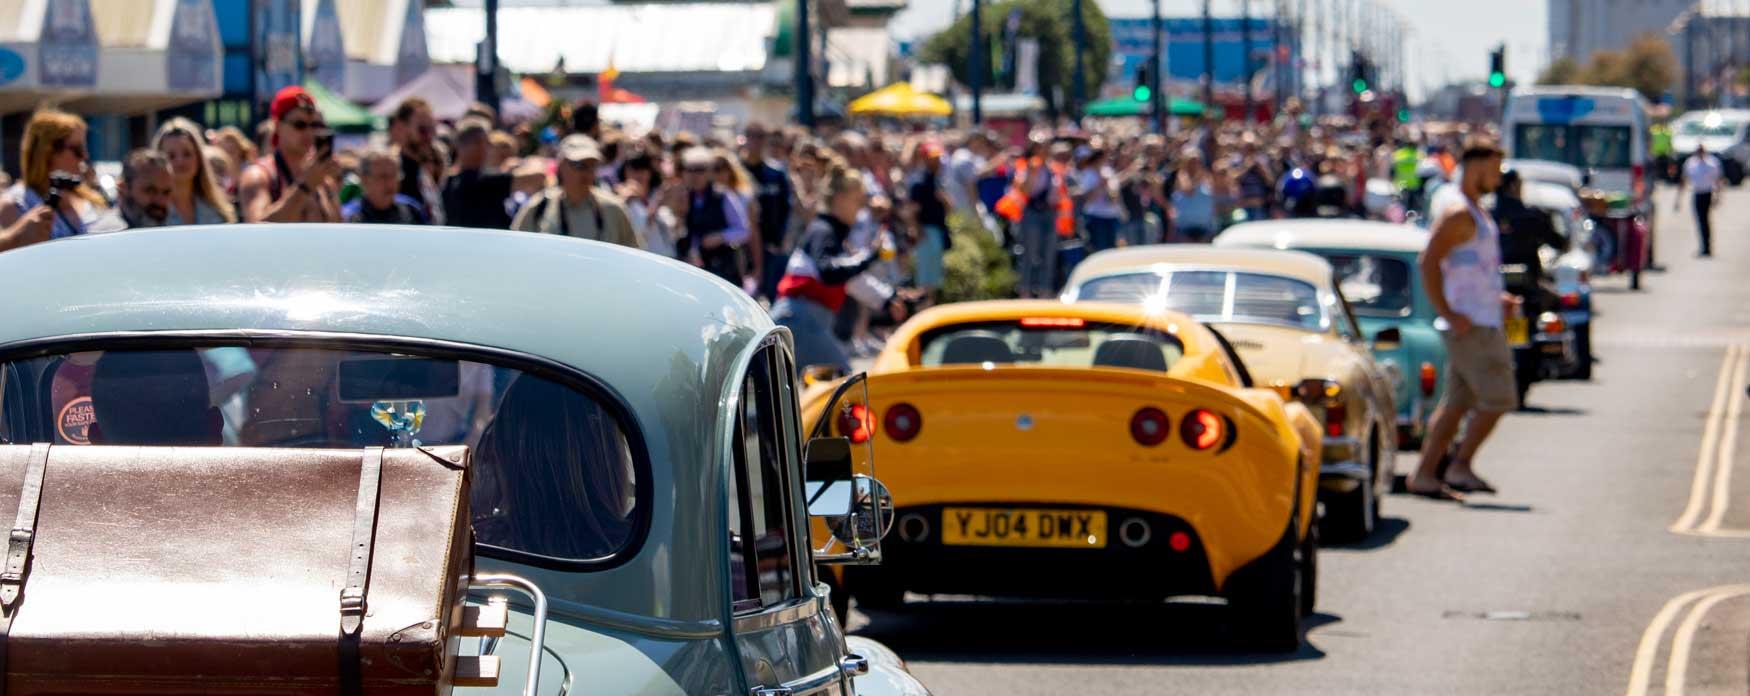 Visit Great Yarmouth Wheels Festival Great Yarmouth